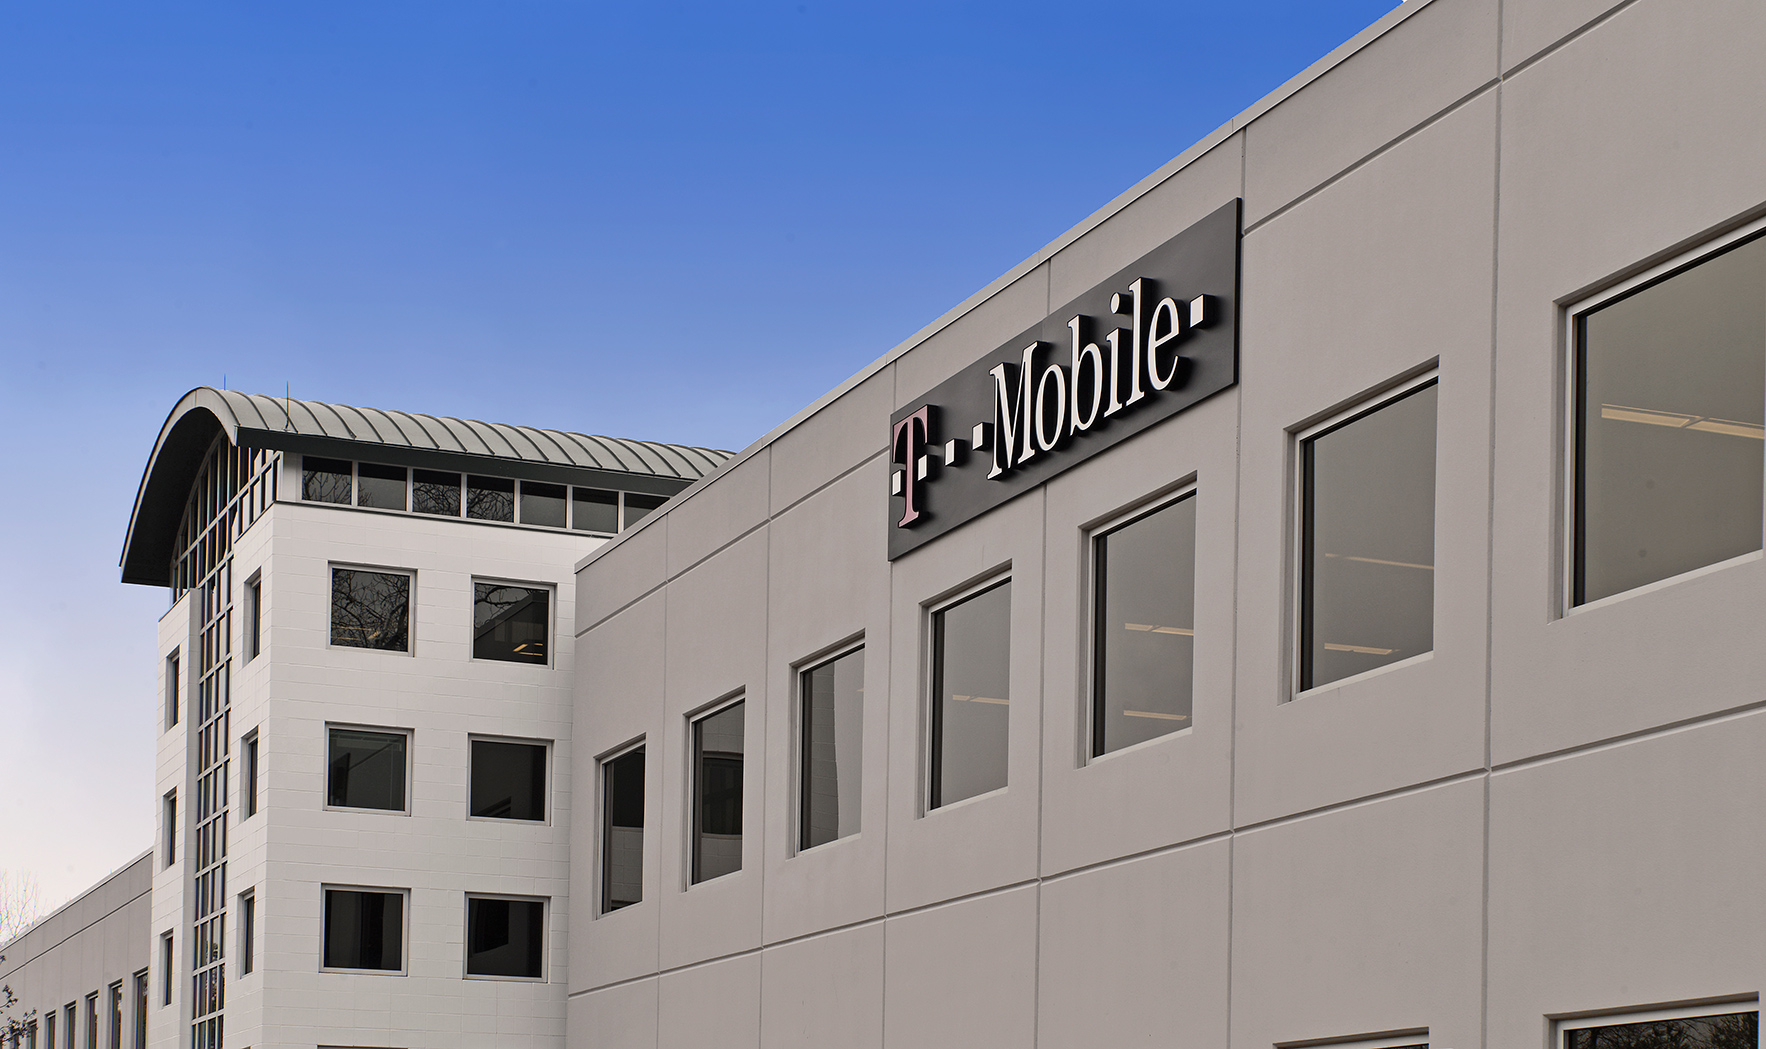 Exterior view of T Mobile Corporate Office